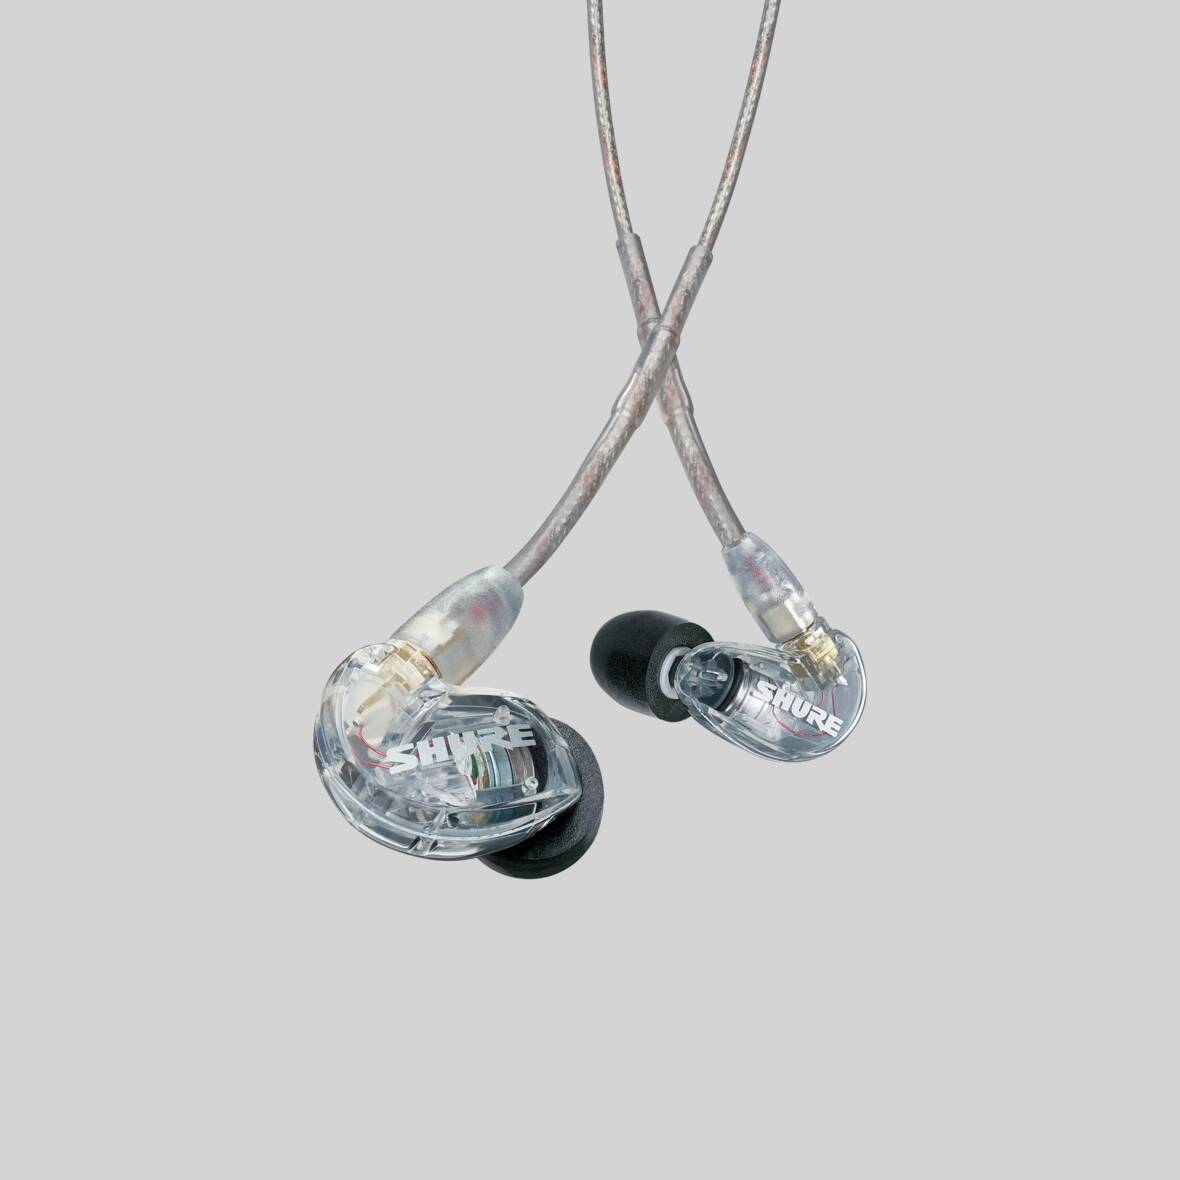 B Stock : Shure SE215 Sound Isolating In Ear Monitors - Clear